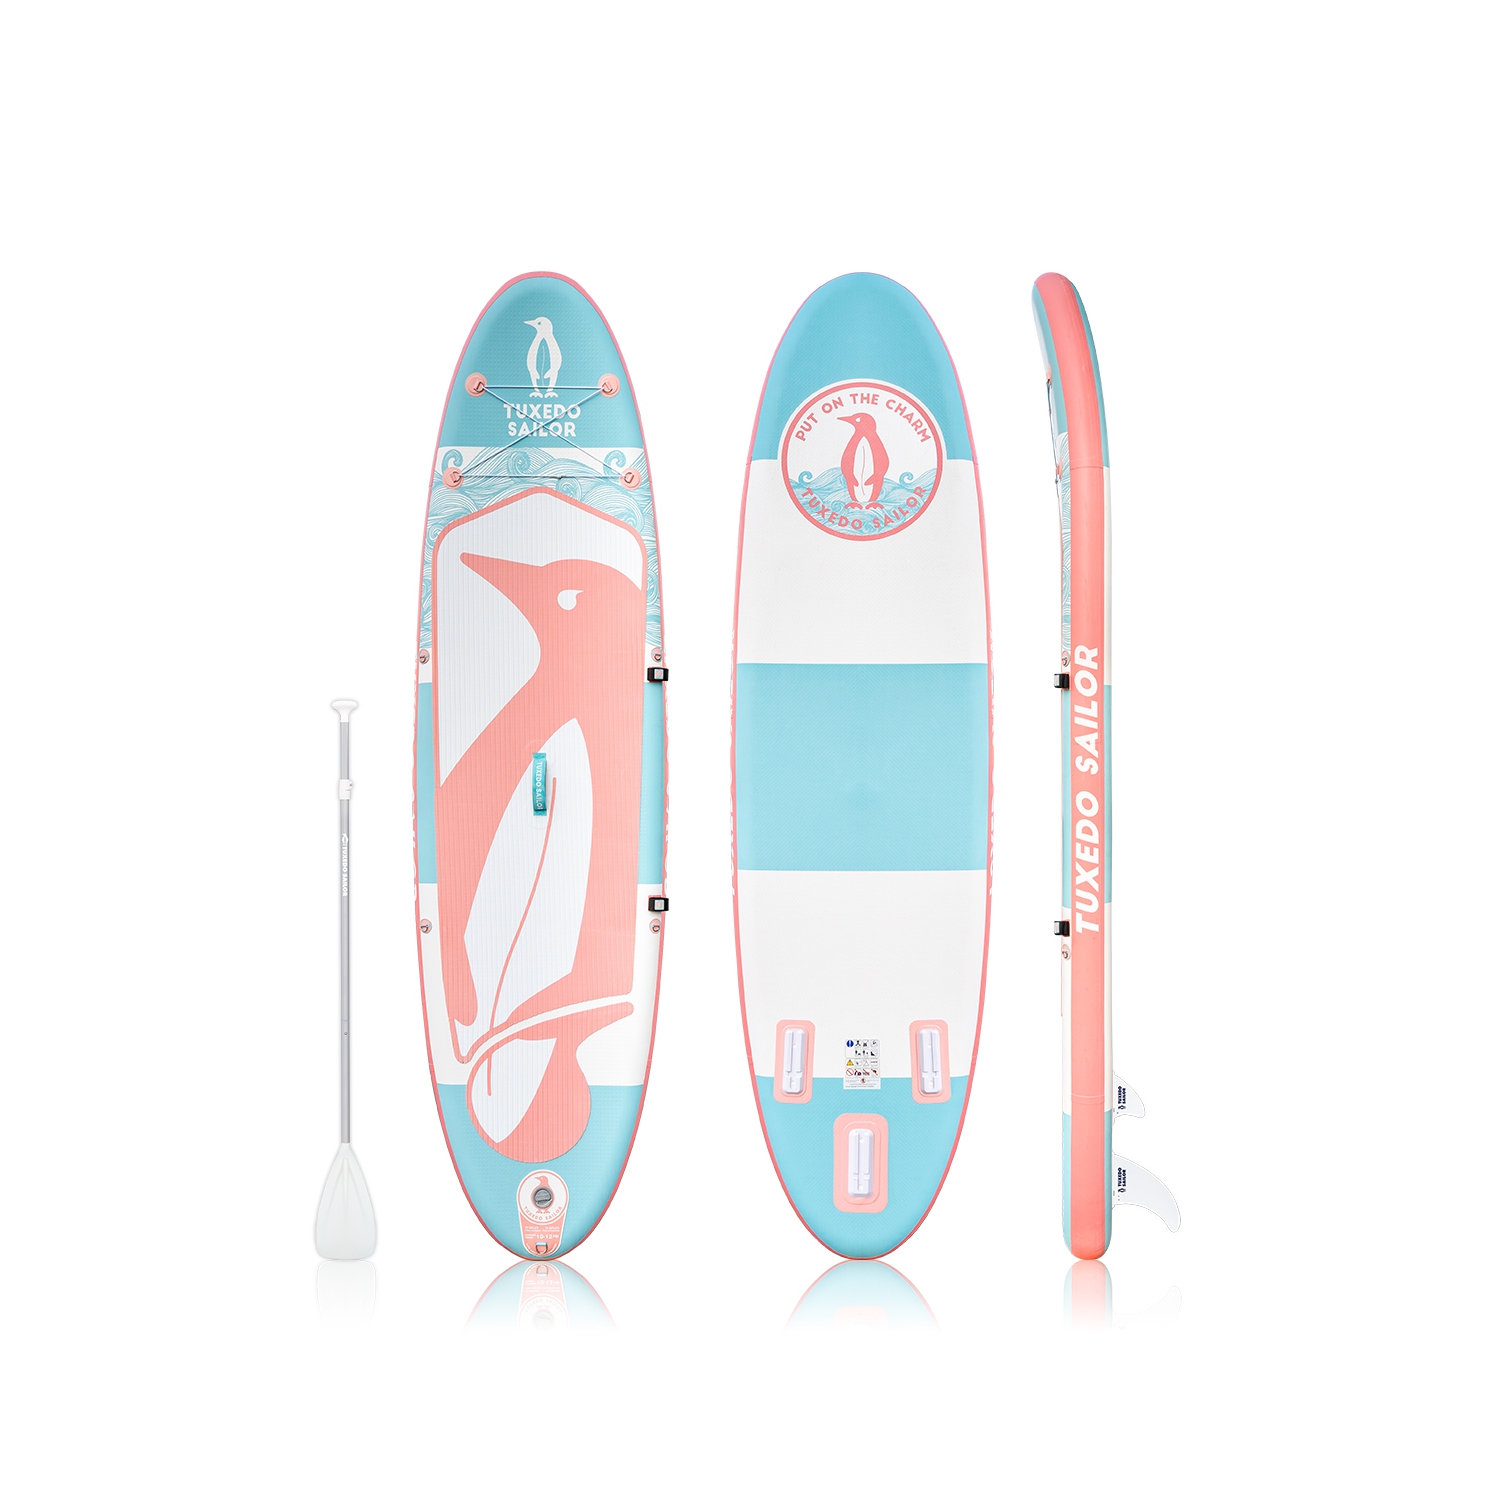 Tuxedo Sailor Premium Inflatable Stand Up Paddle Board, Ultra Light SUP Suitable for All Skill Levels-SANVU 10′